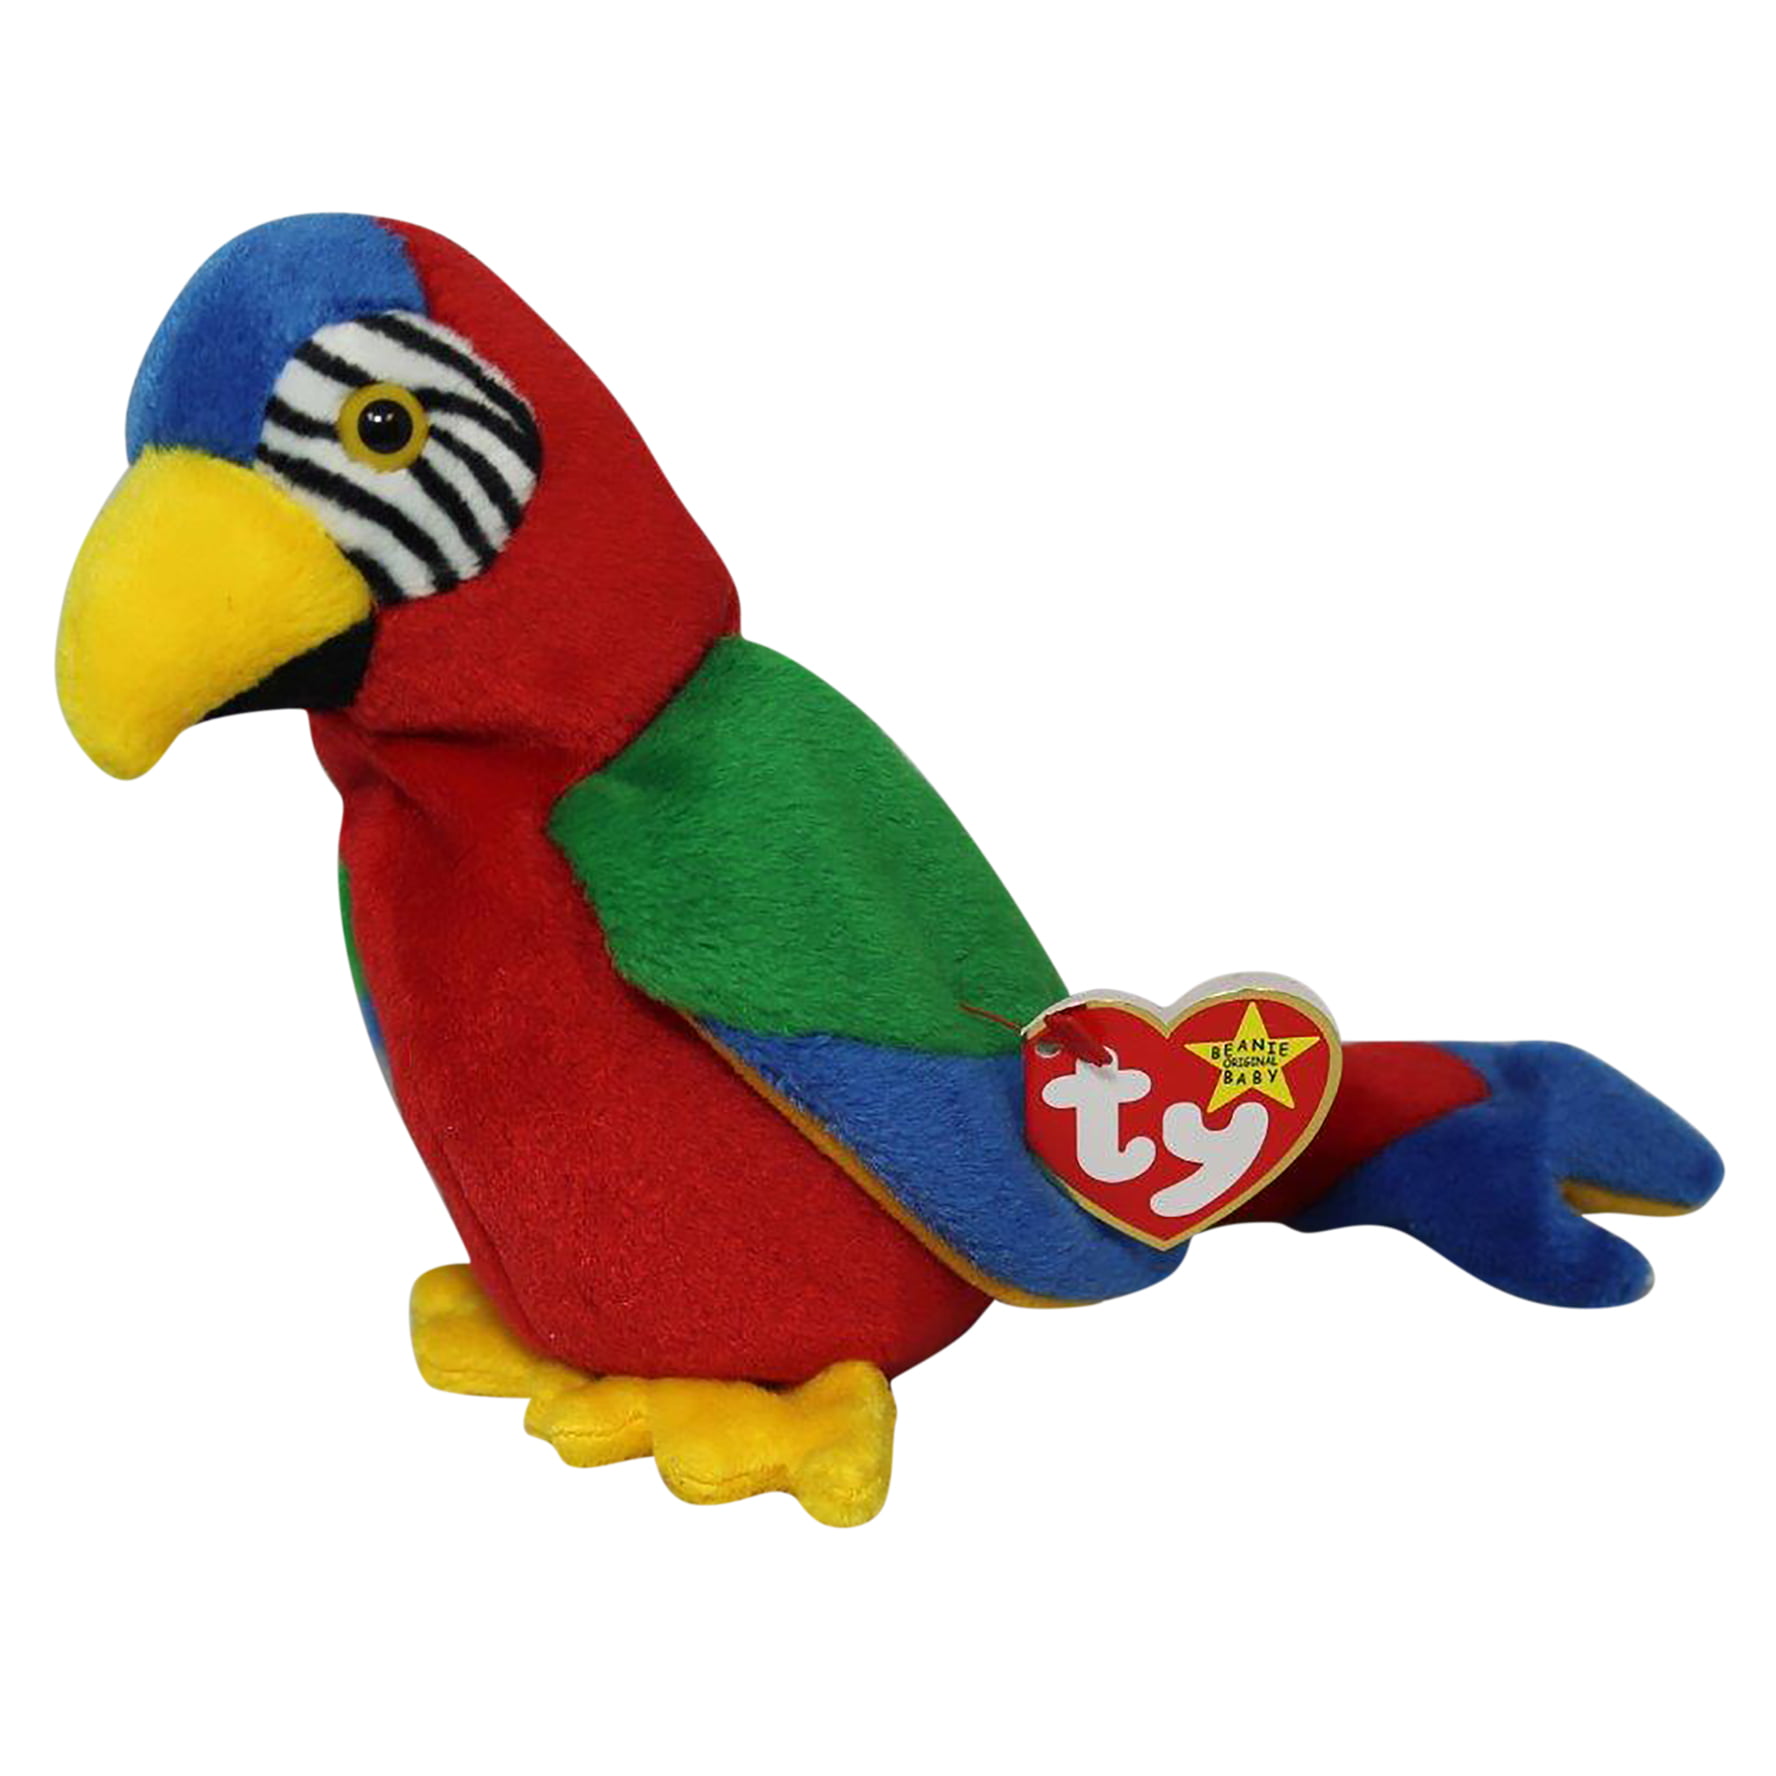 NM/Mint JABBER the Parrot TY Beanie Babies BBOC Card Series 1 Common 